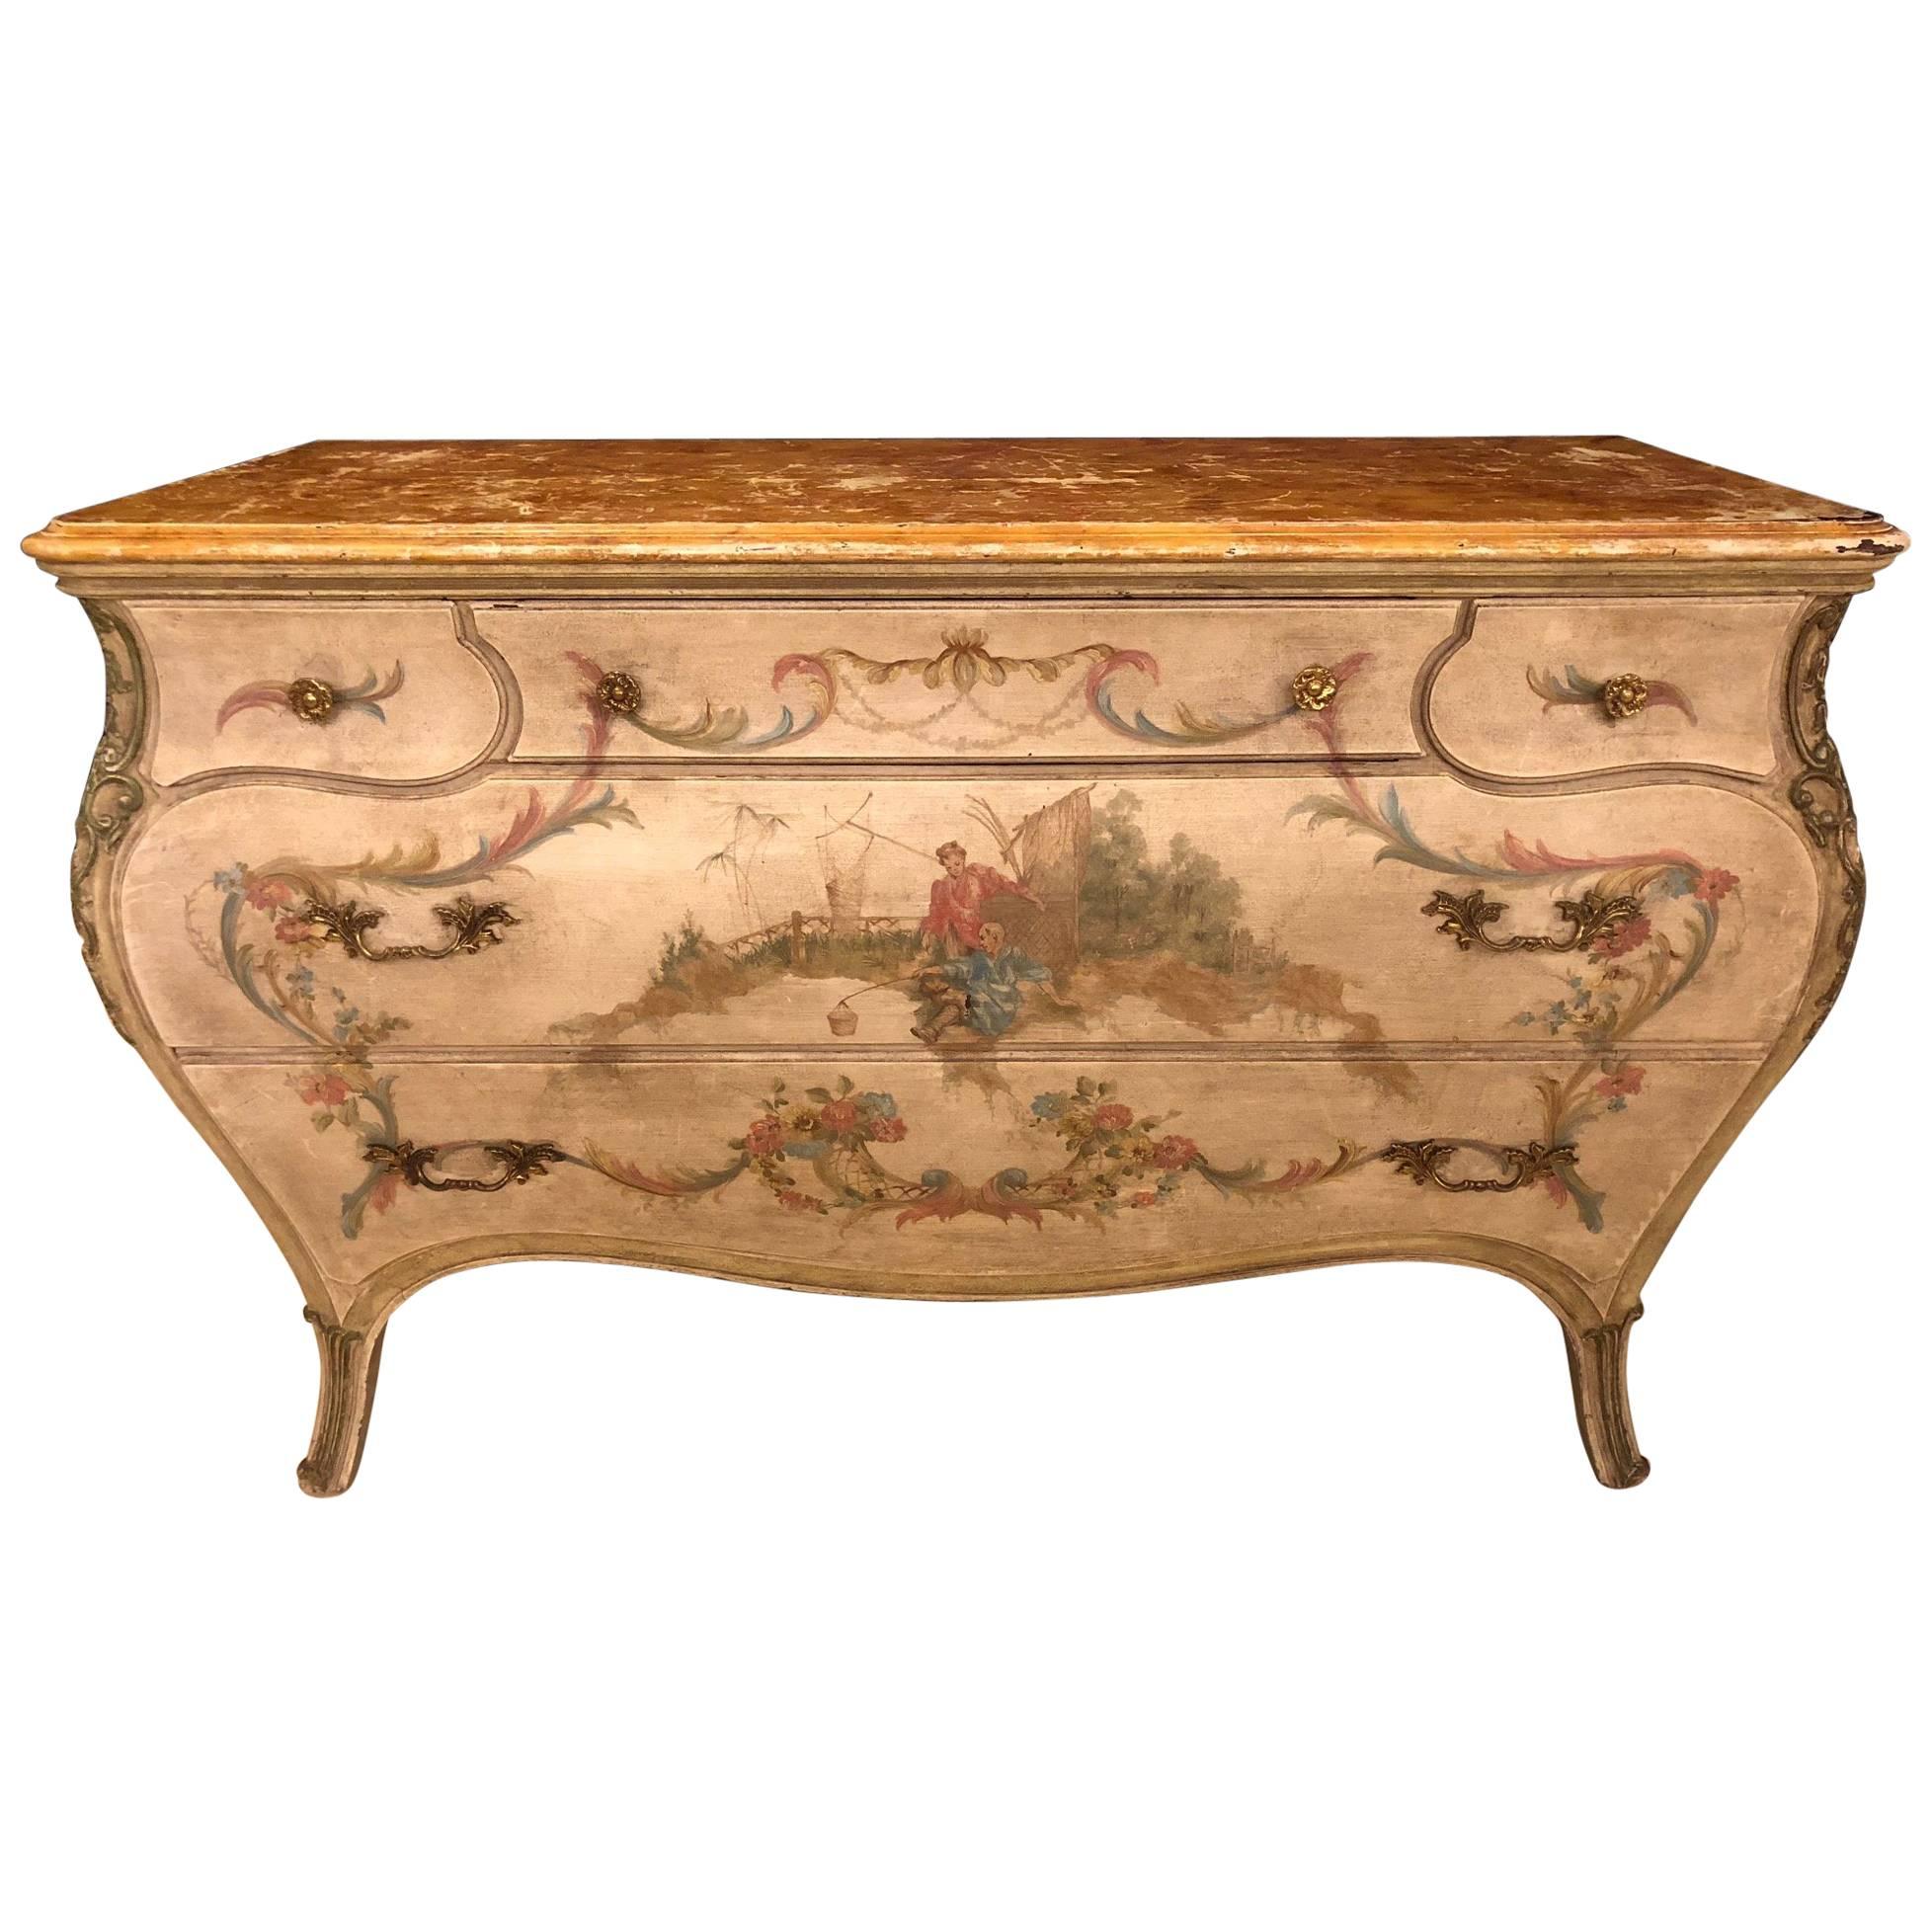 Venetian Scenic Bombe Chinoiserie Painted Commode with a Faux Marble Top For Sale